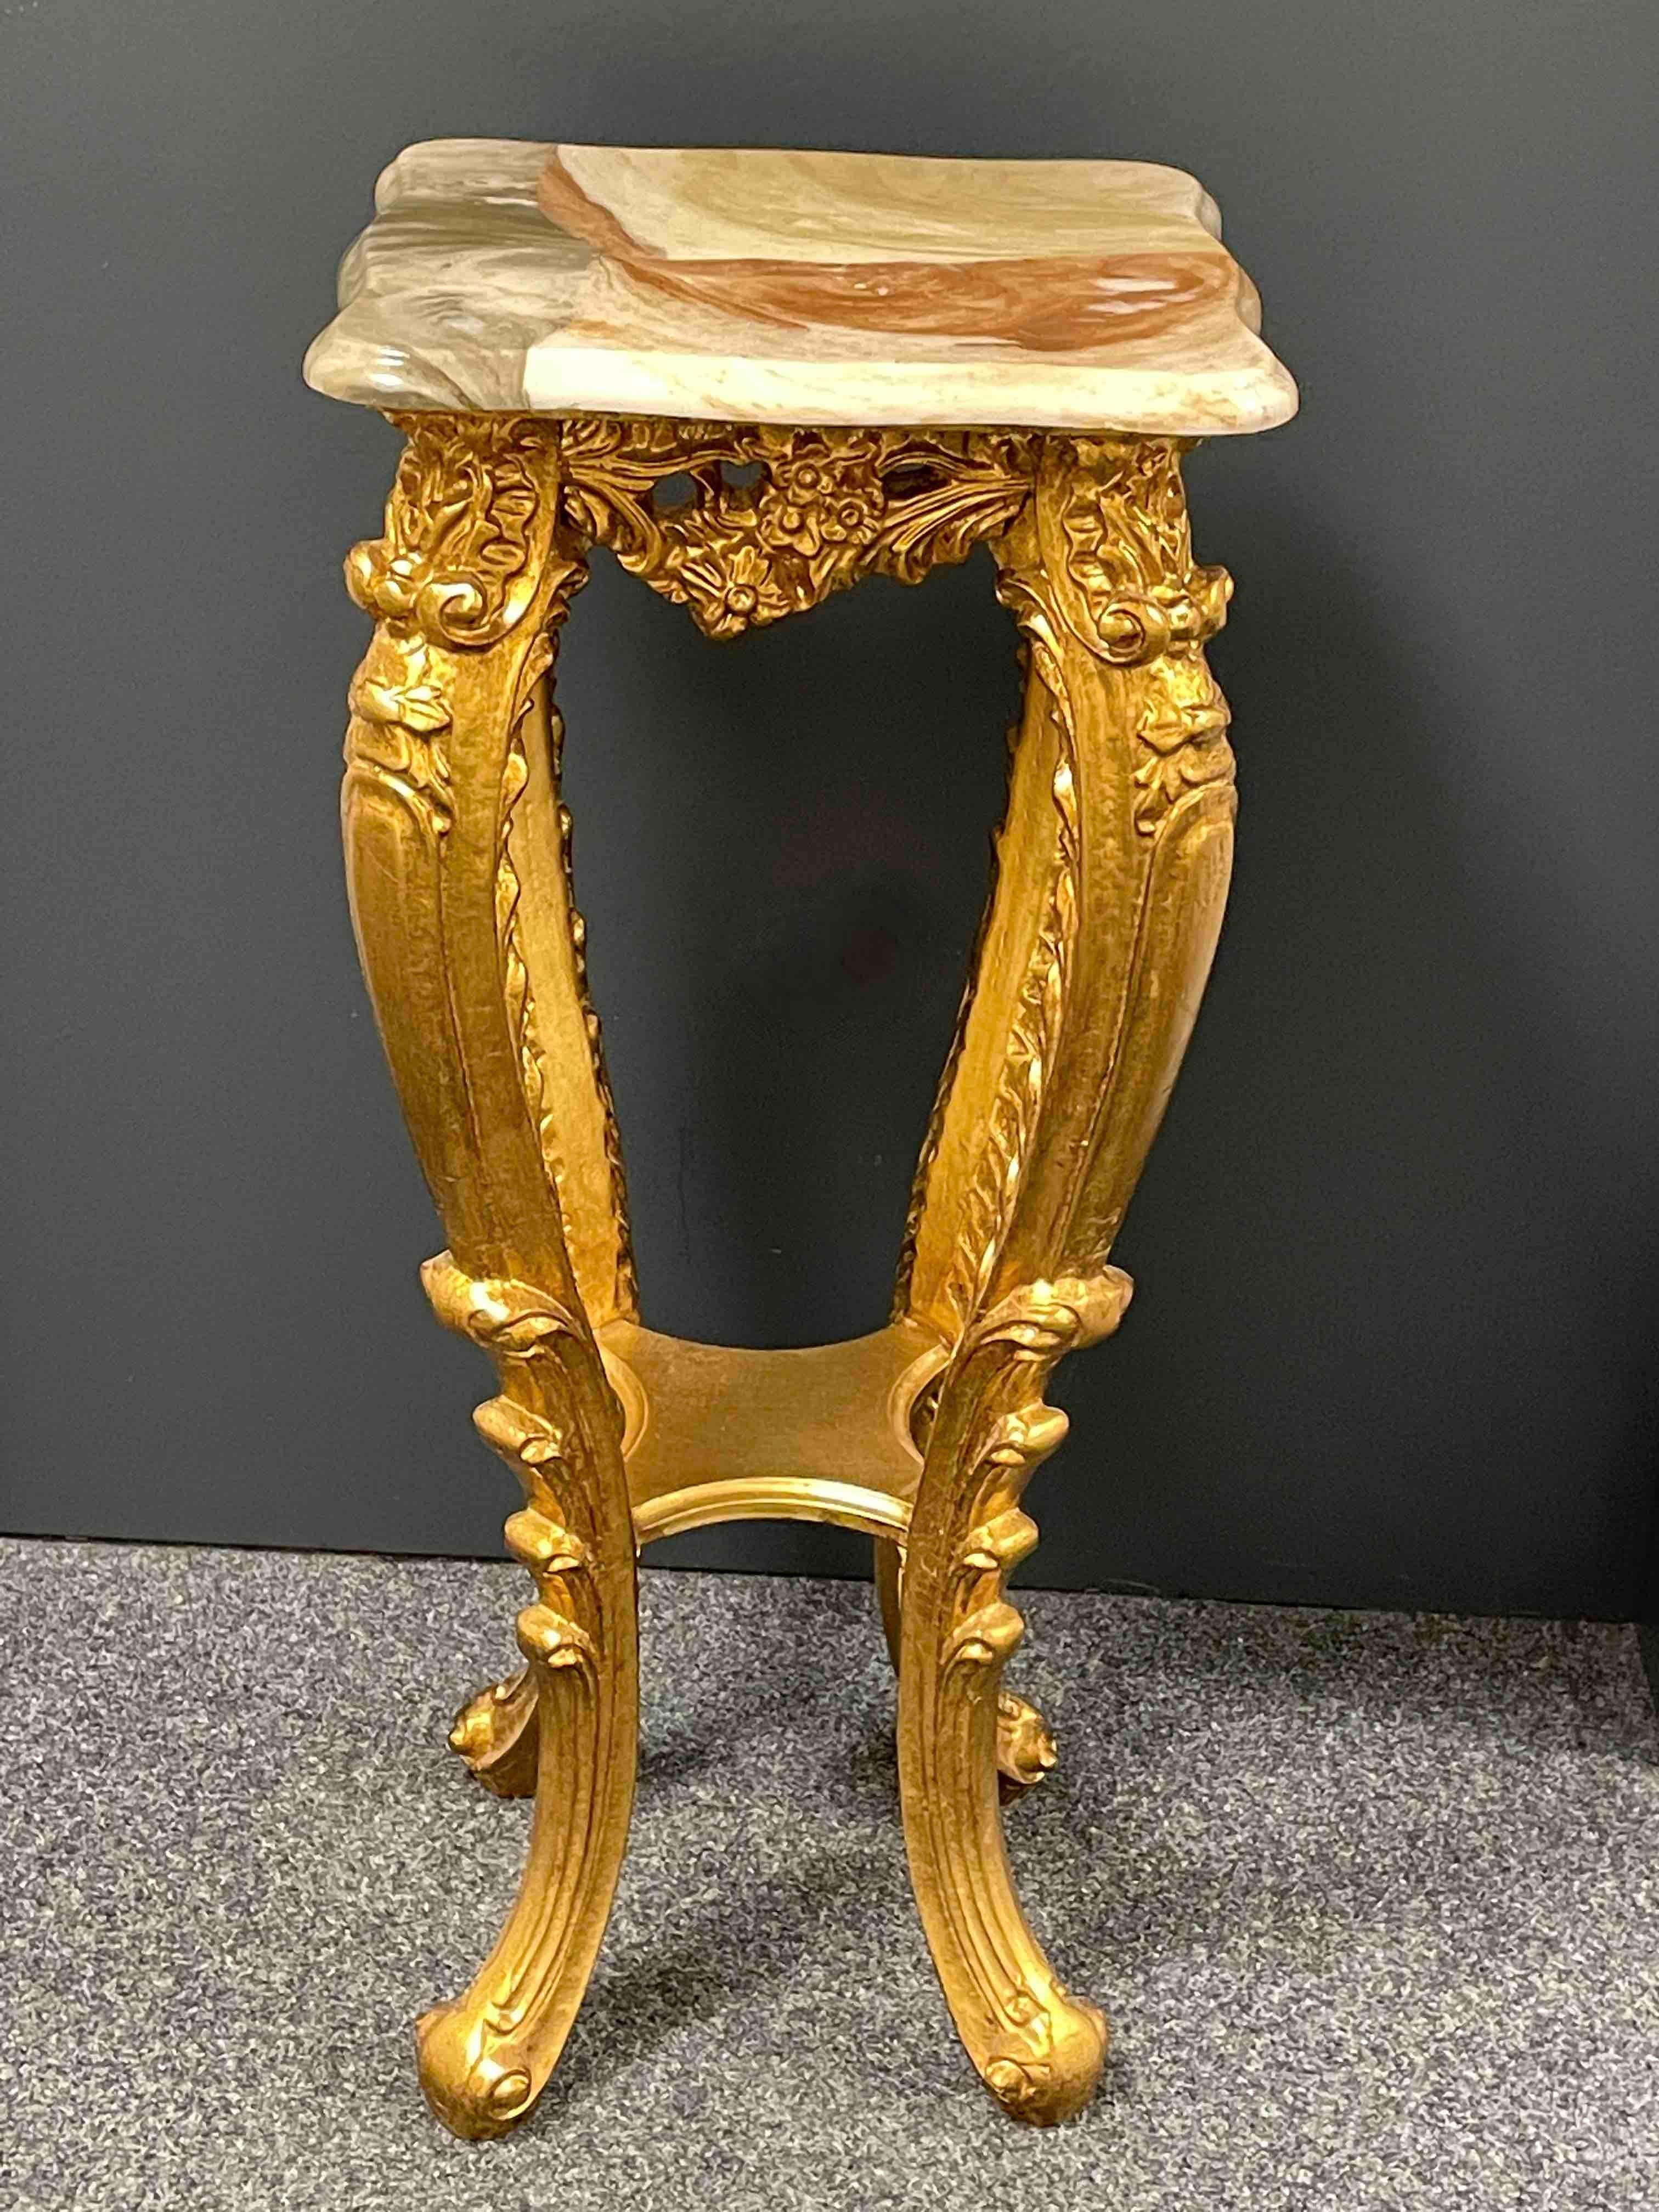 Hollywood Regency 20th Century Carved Gilt Wood Toleware Console Pedestal Table, Italy For Sale